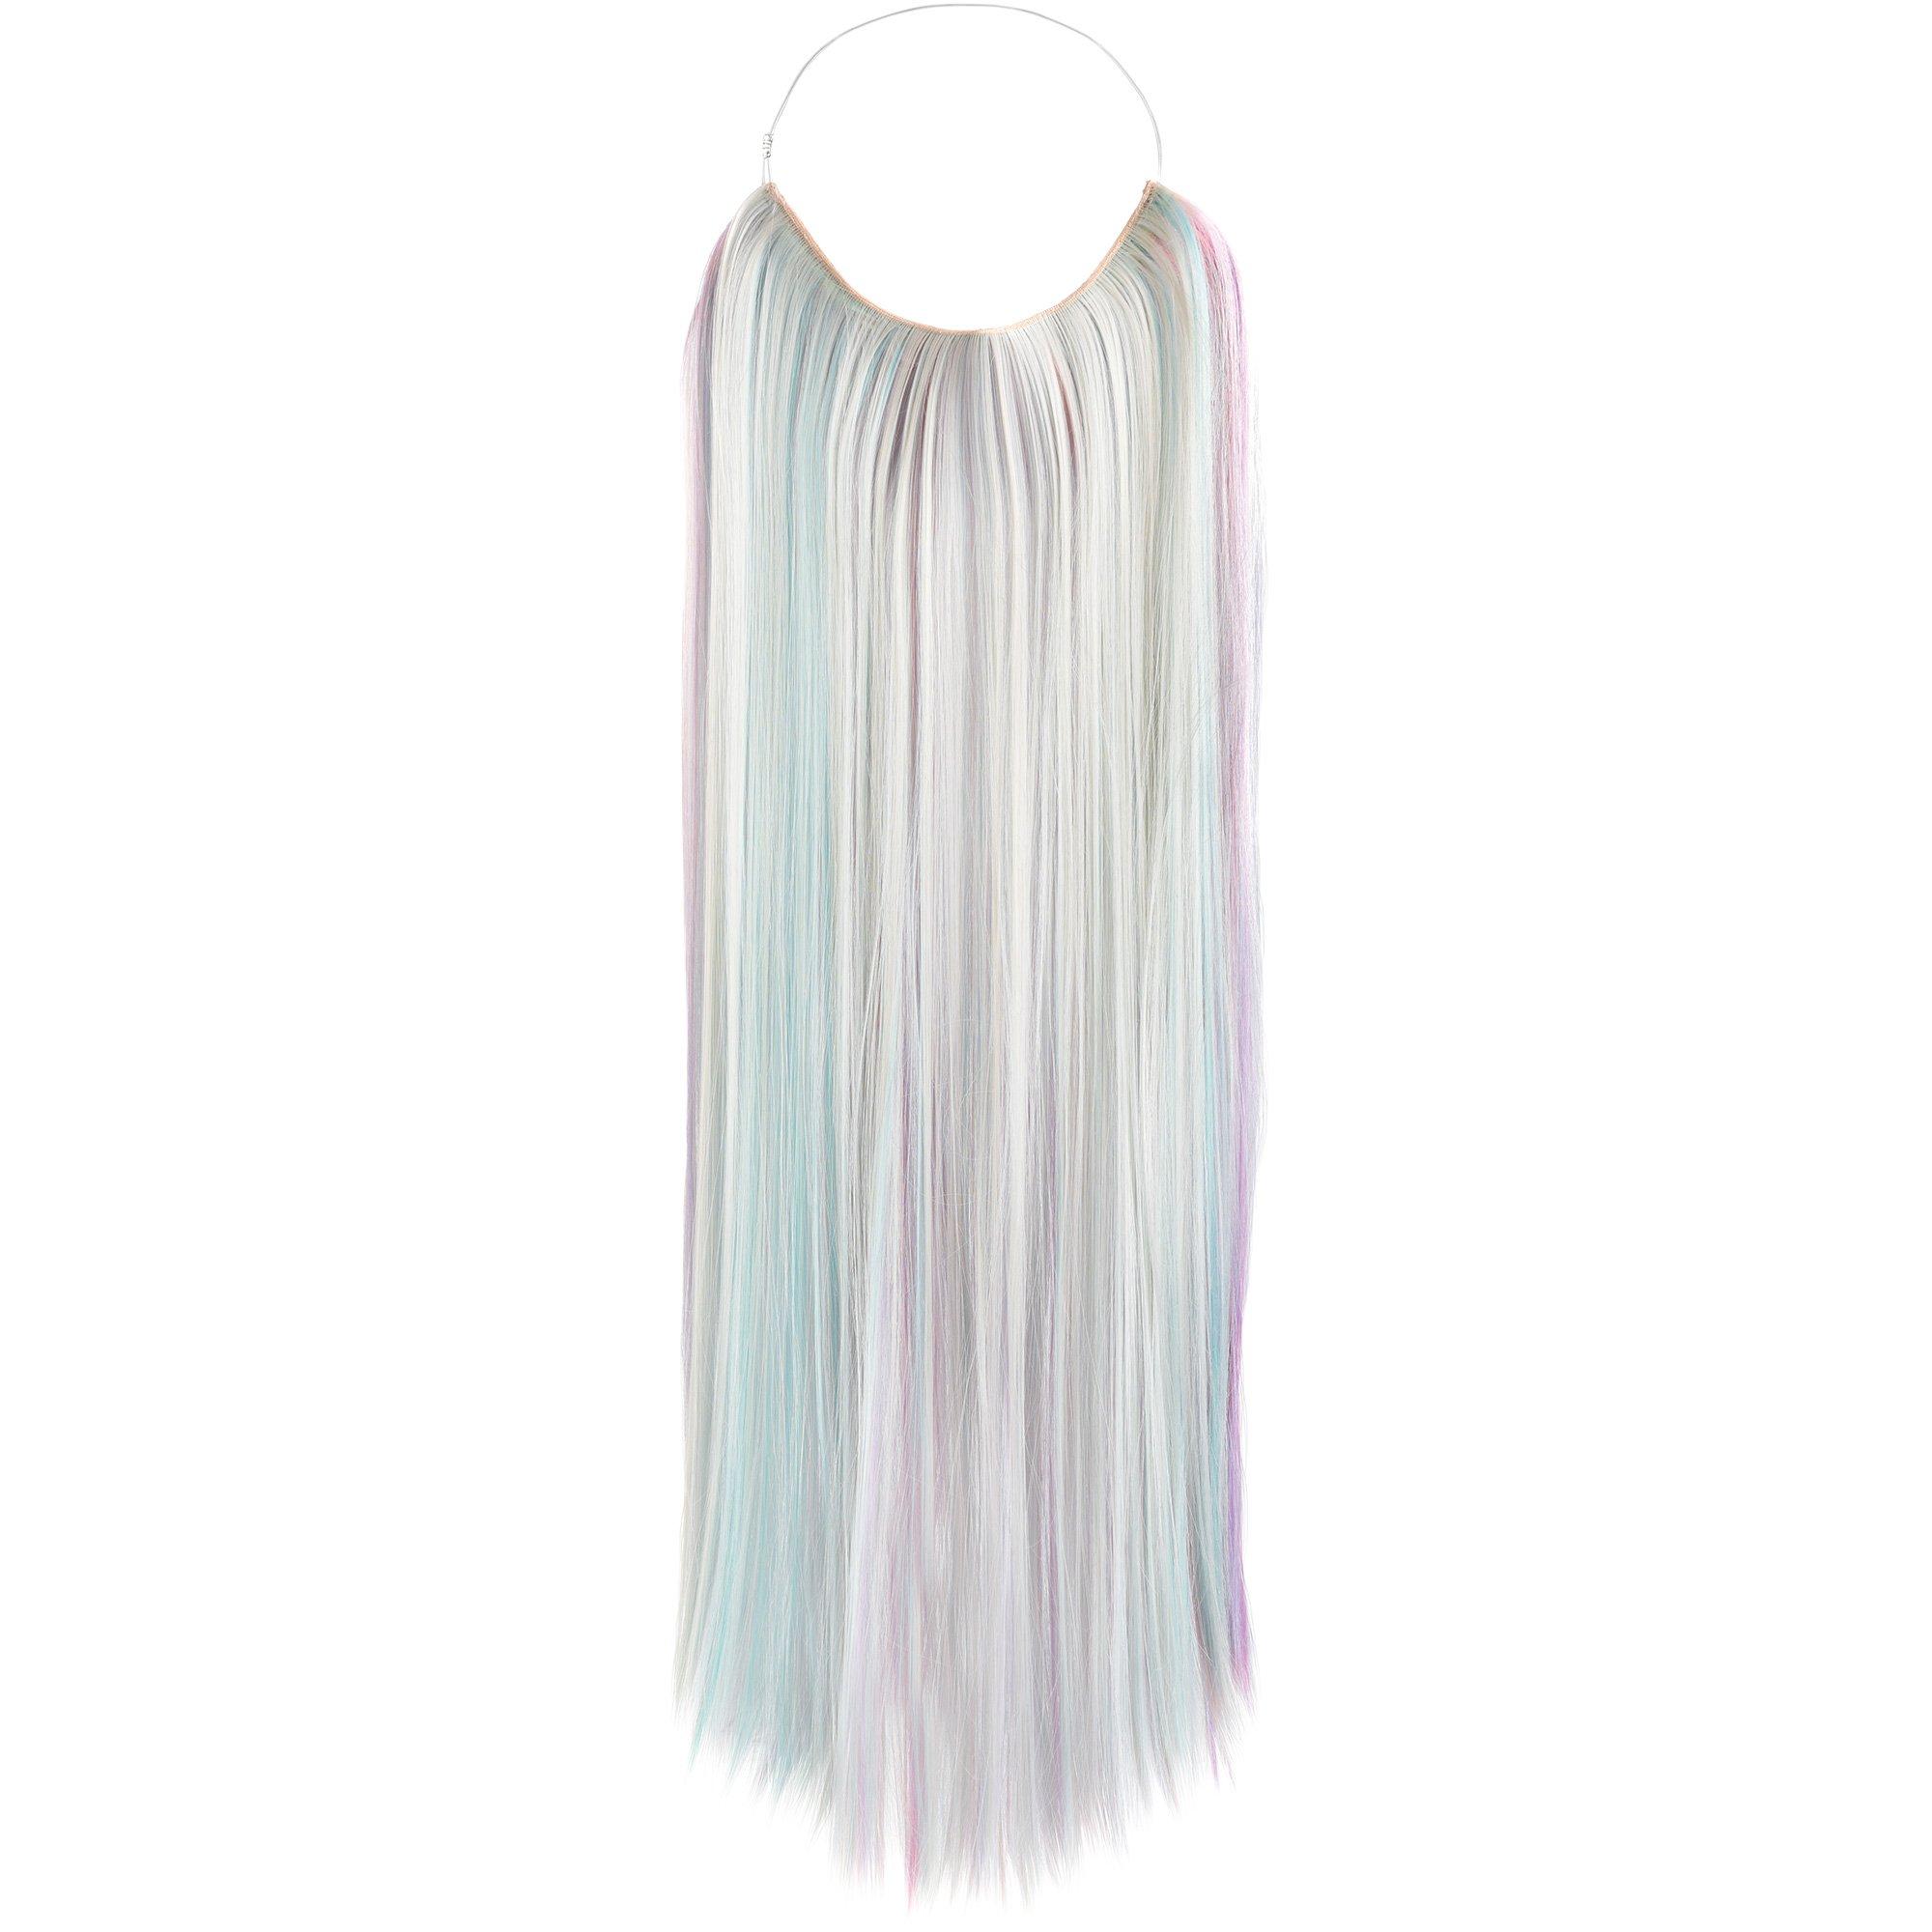 Mystical Halo Pastel Hair Extension, 25in